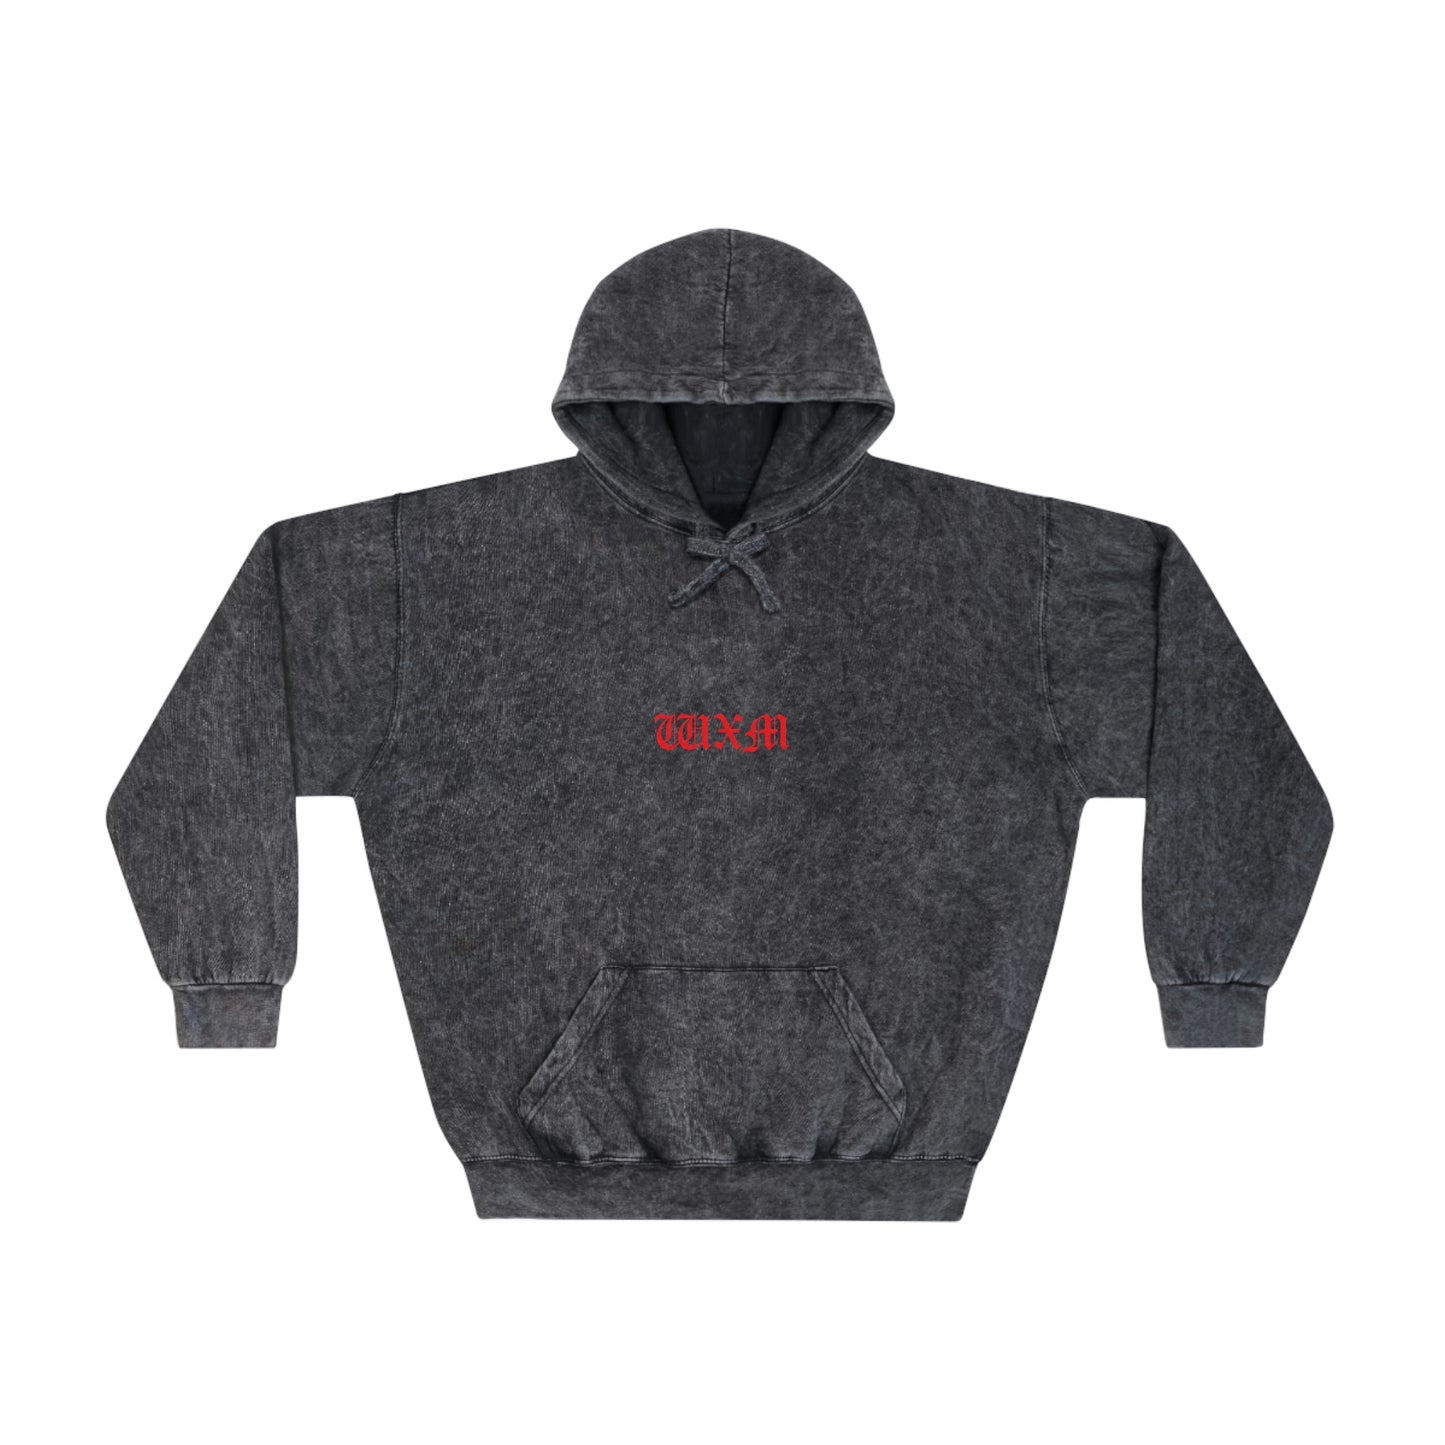 LAW OF ATTRACTION LA PULL-OVER HOODIE